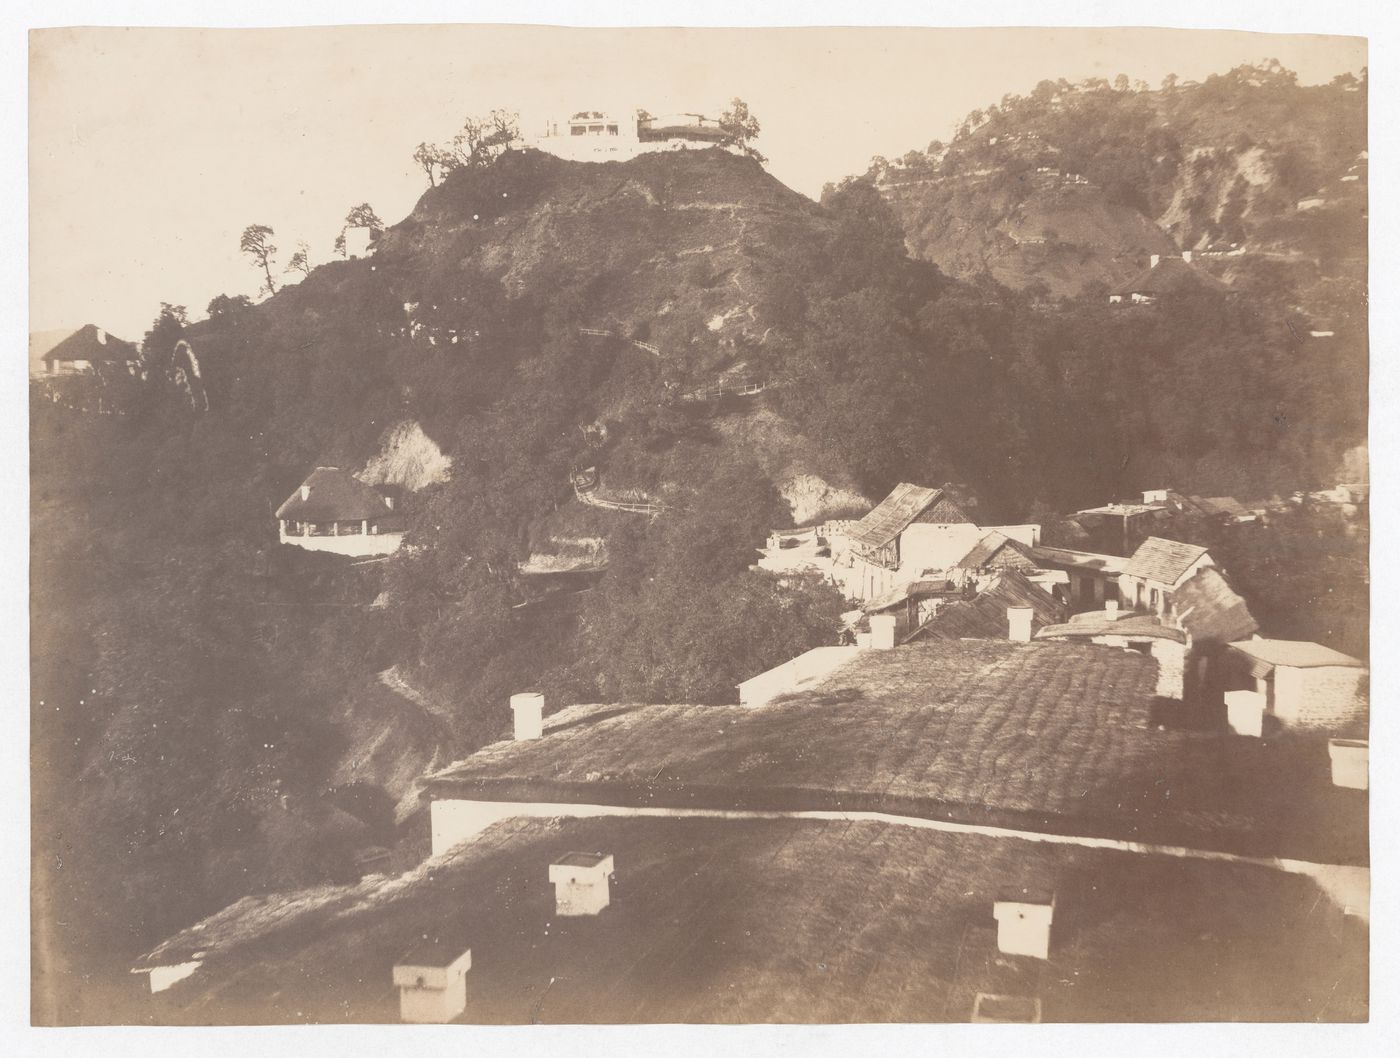 View of "The Castle", the house of Maharaja Dhulip Singh, from the roof of Mrs. Ludlums' house, Mussoorie, India